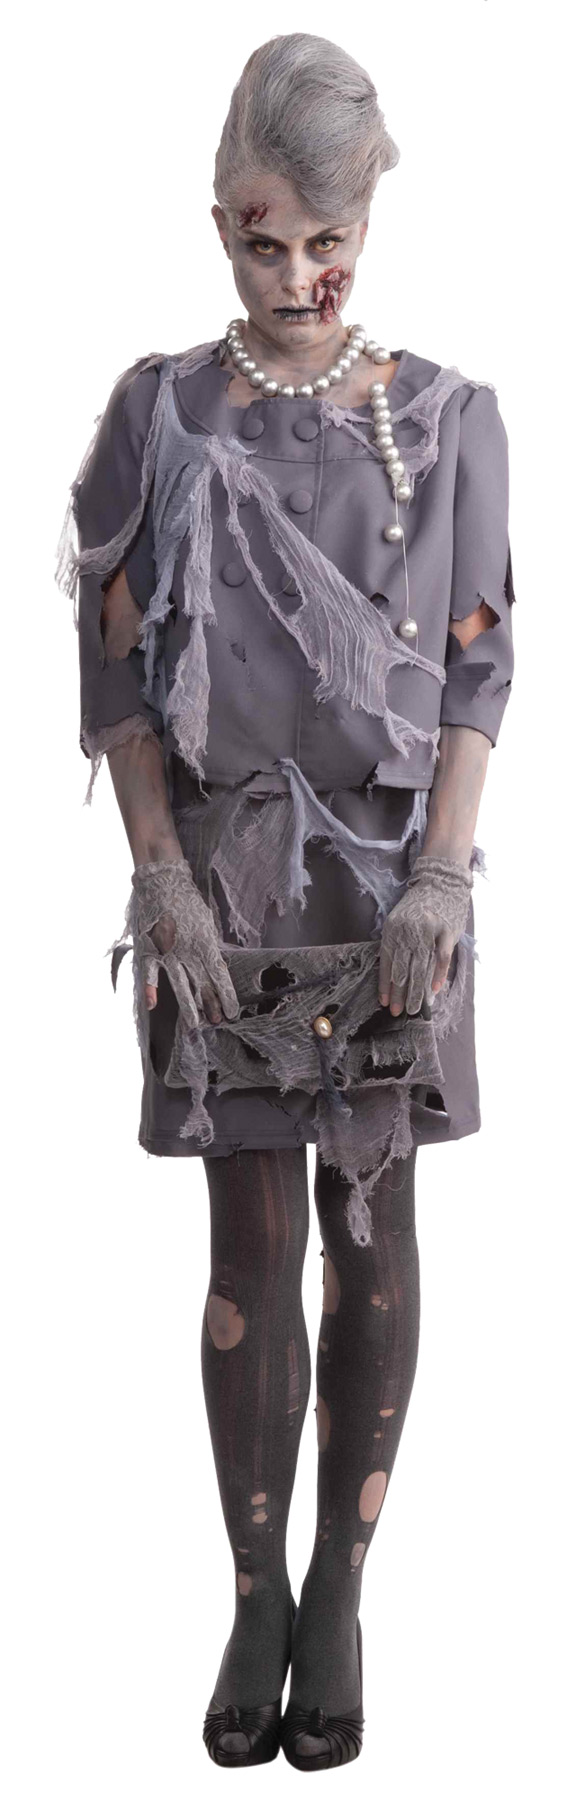 ZOMBIE BUSINESS WOMAN COSTUME